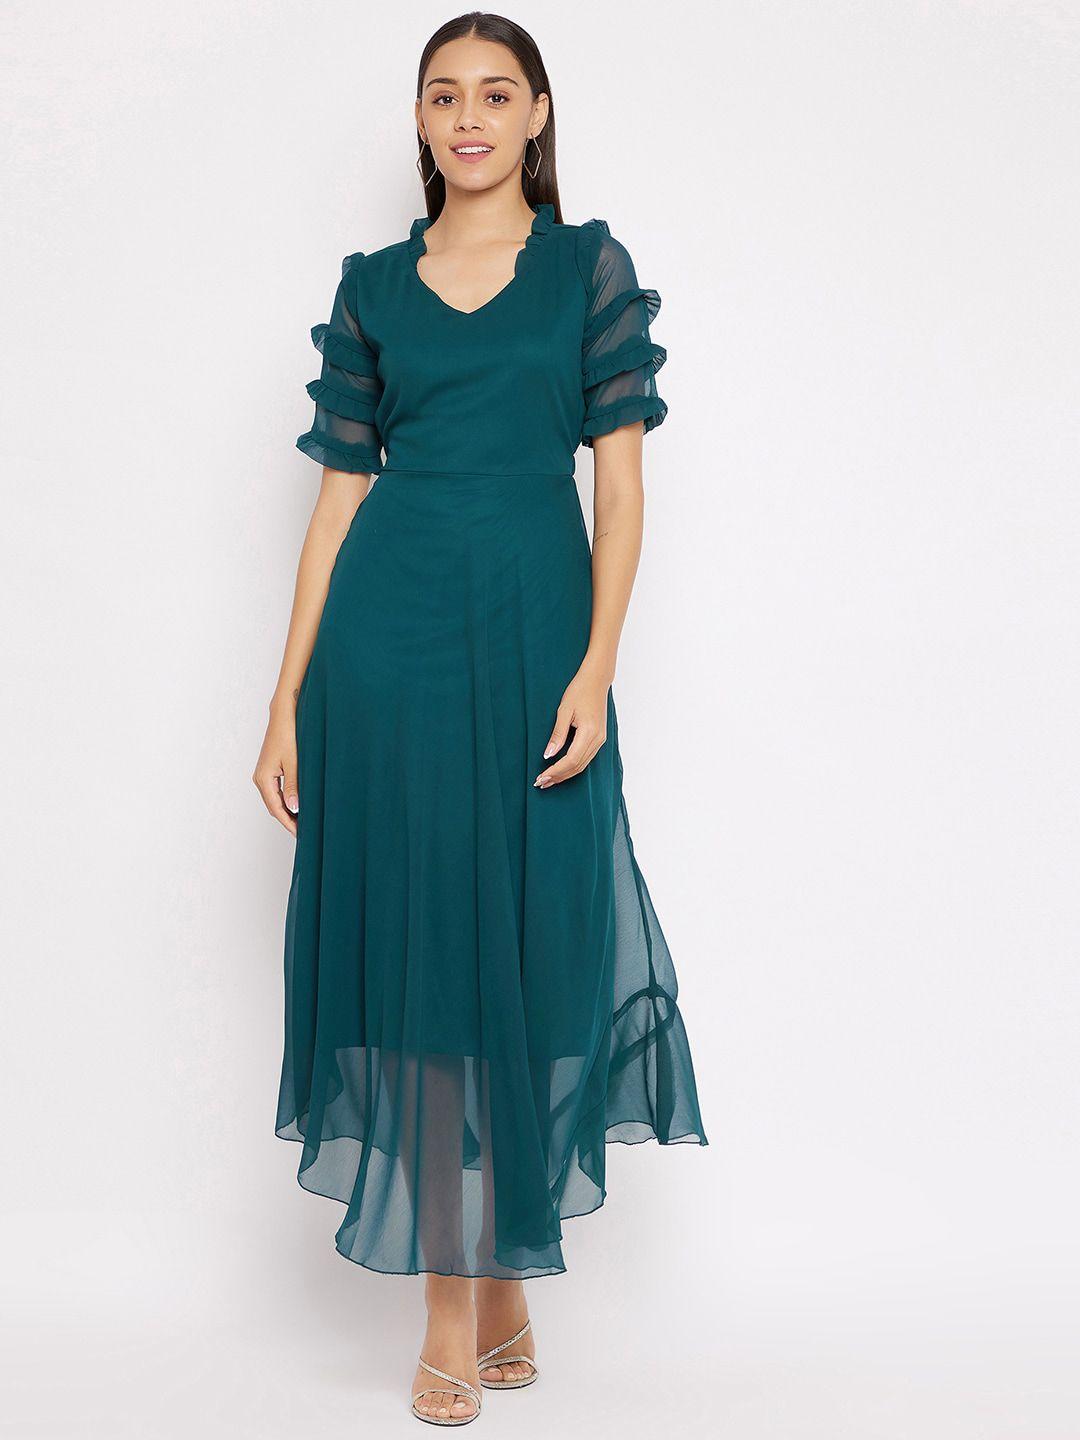 hello design teal green solid georgette maxi dress